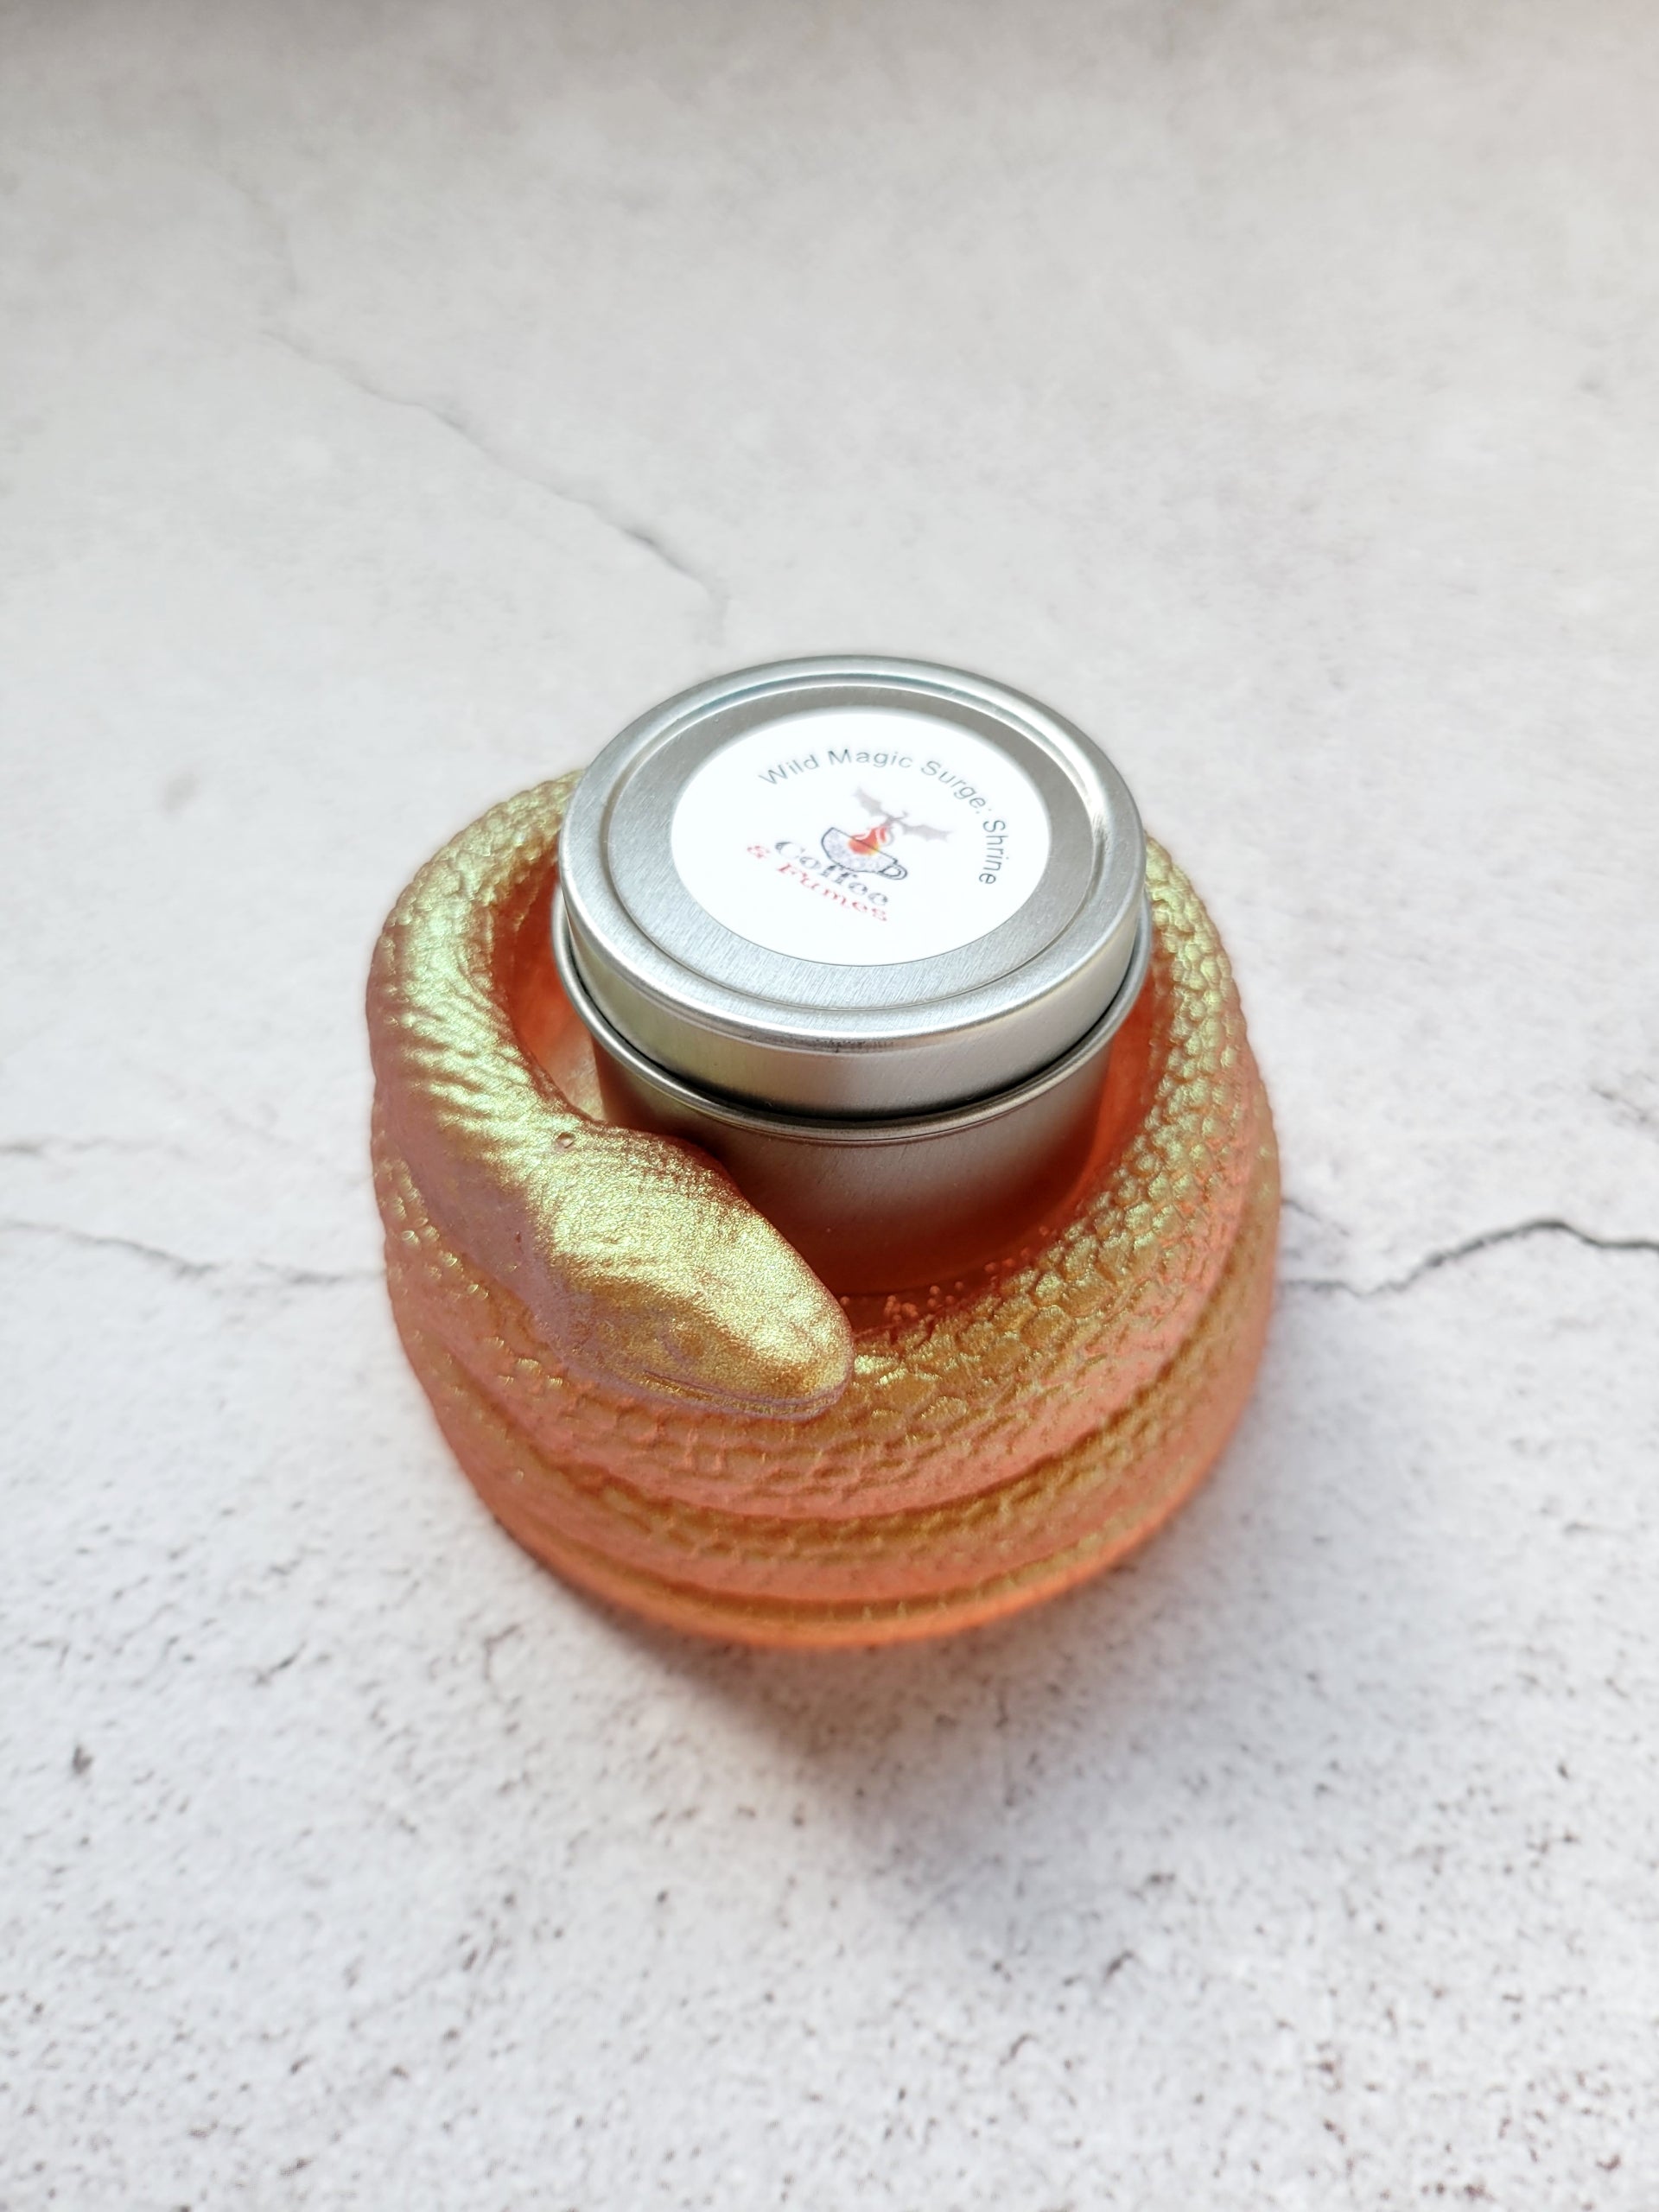 A side view of a tealight candle holder in the style of a coiled snake. It's a shimmering gold color. It has a tealight candle inside to show size comparison.